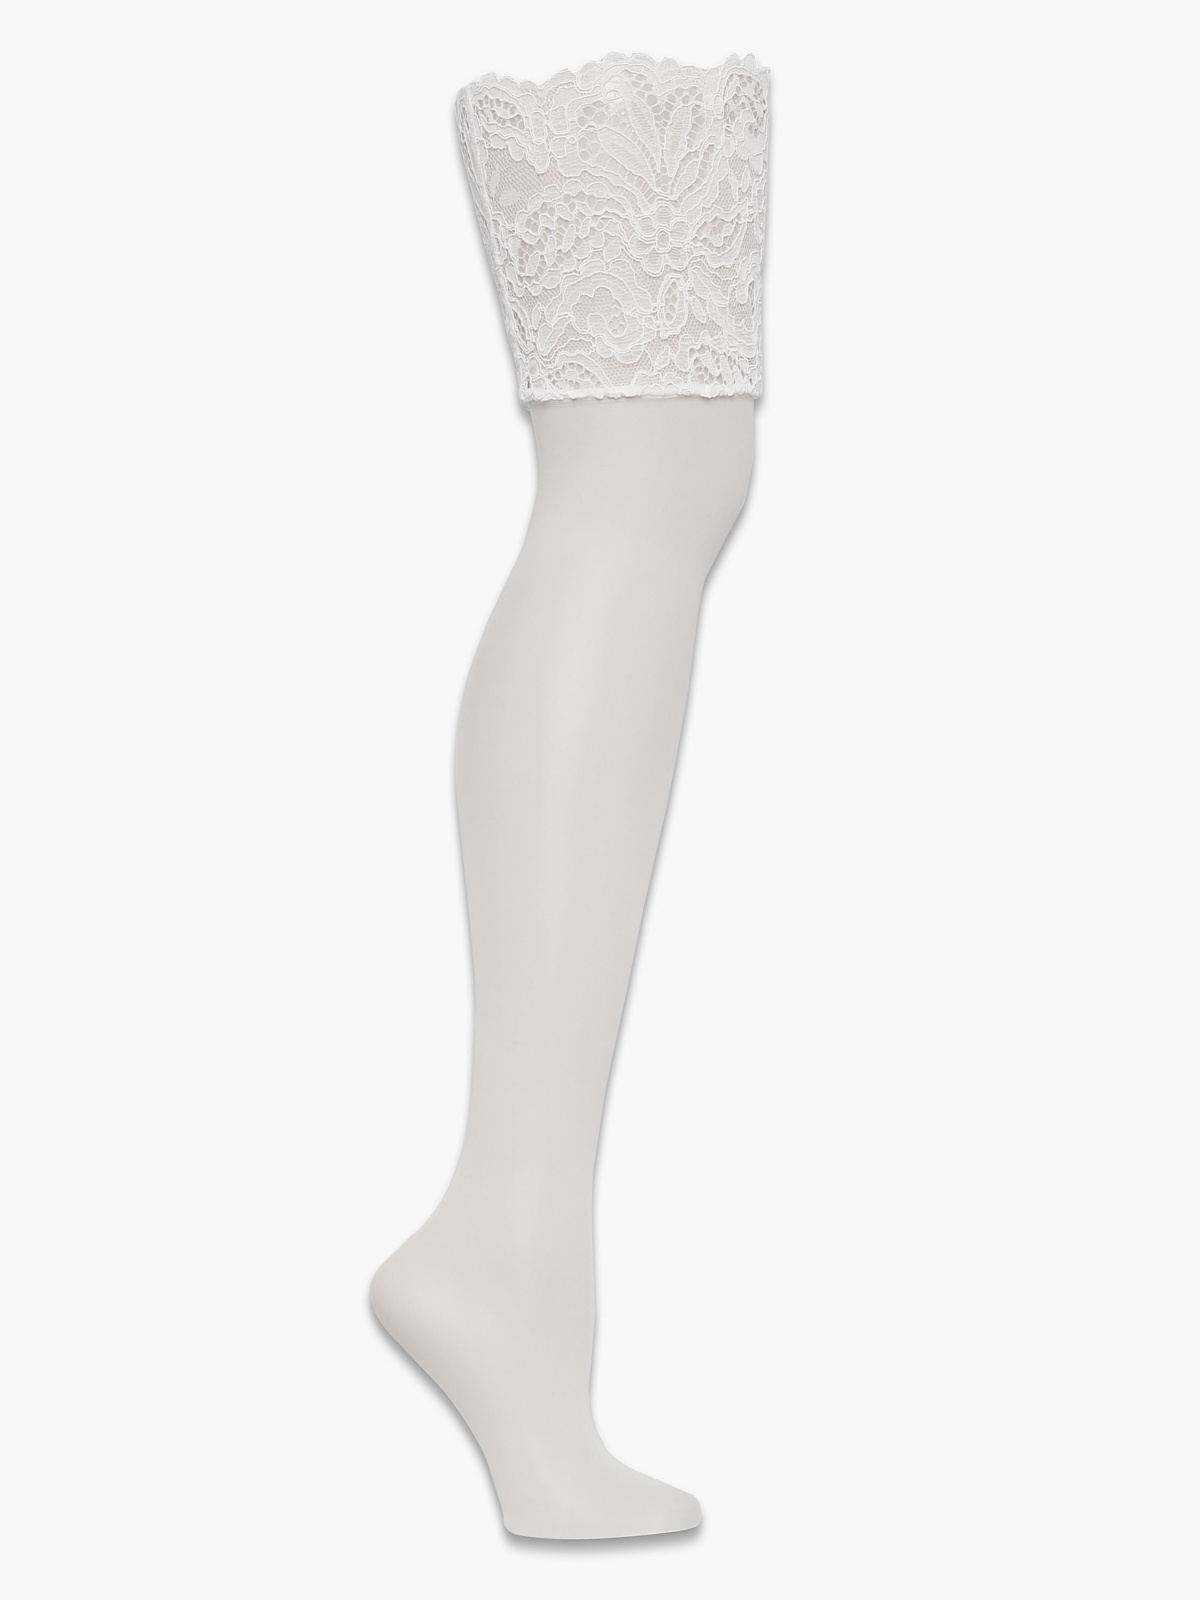 Romantic Corded Lace Thigh-High Stockings